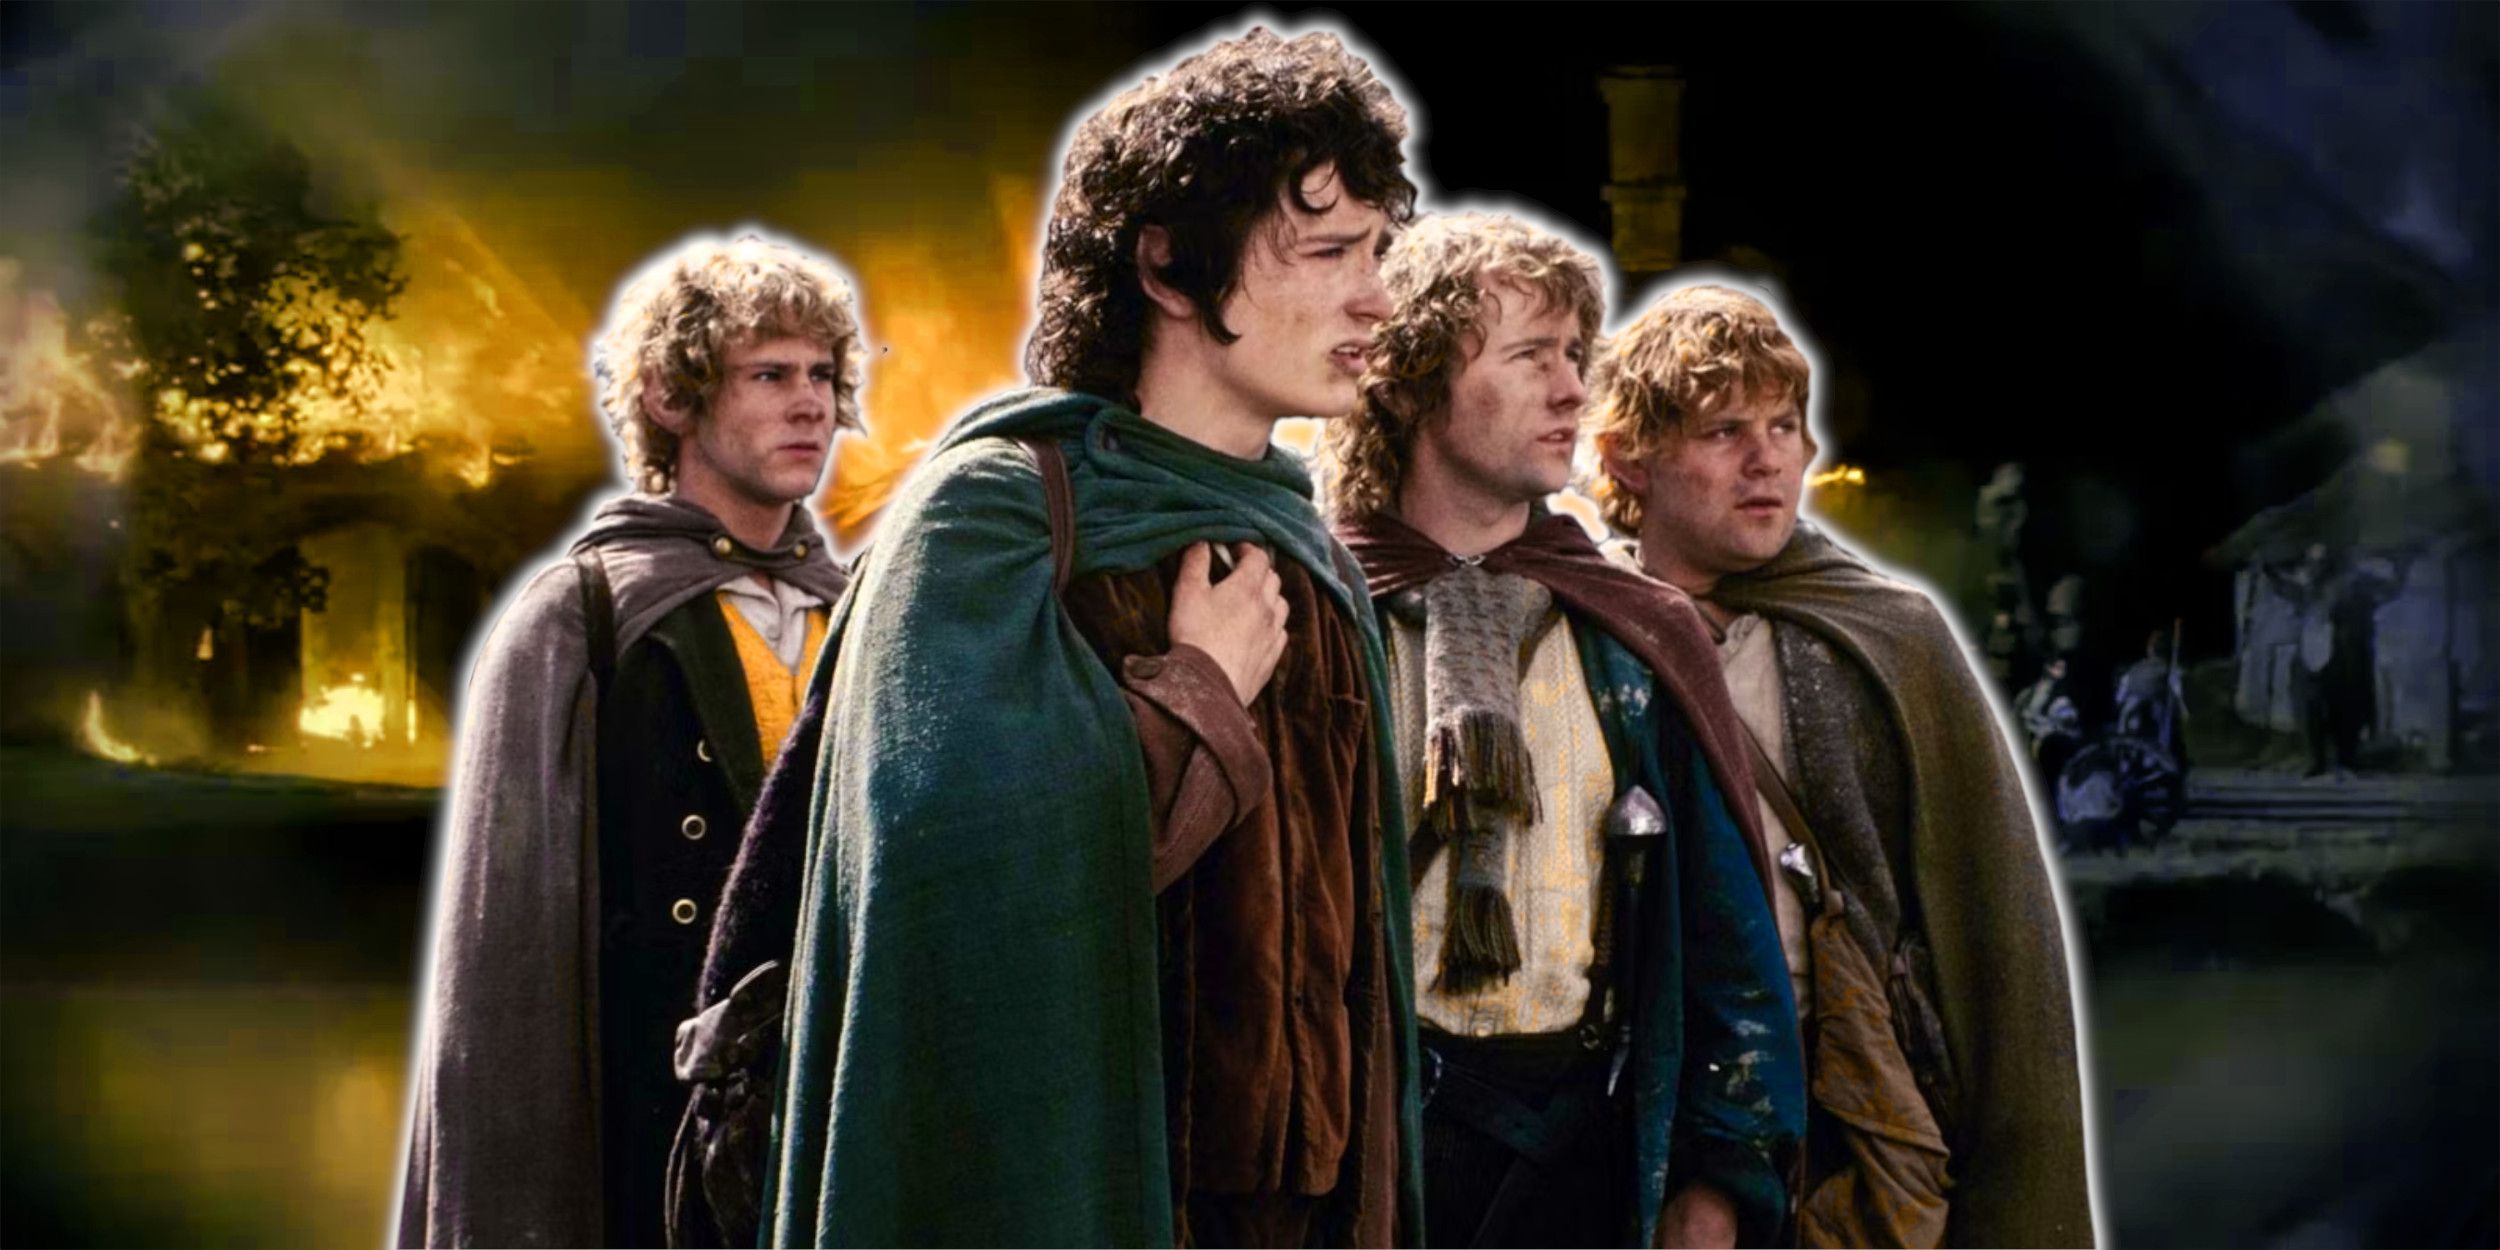 The four hobbits from The Lord of the Rings in front of Frodo's vision of the Shire burning